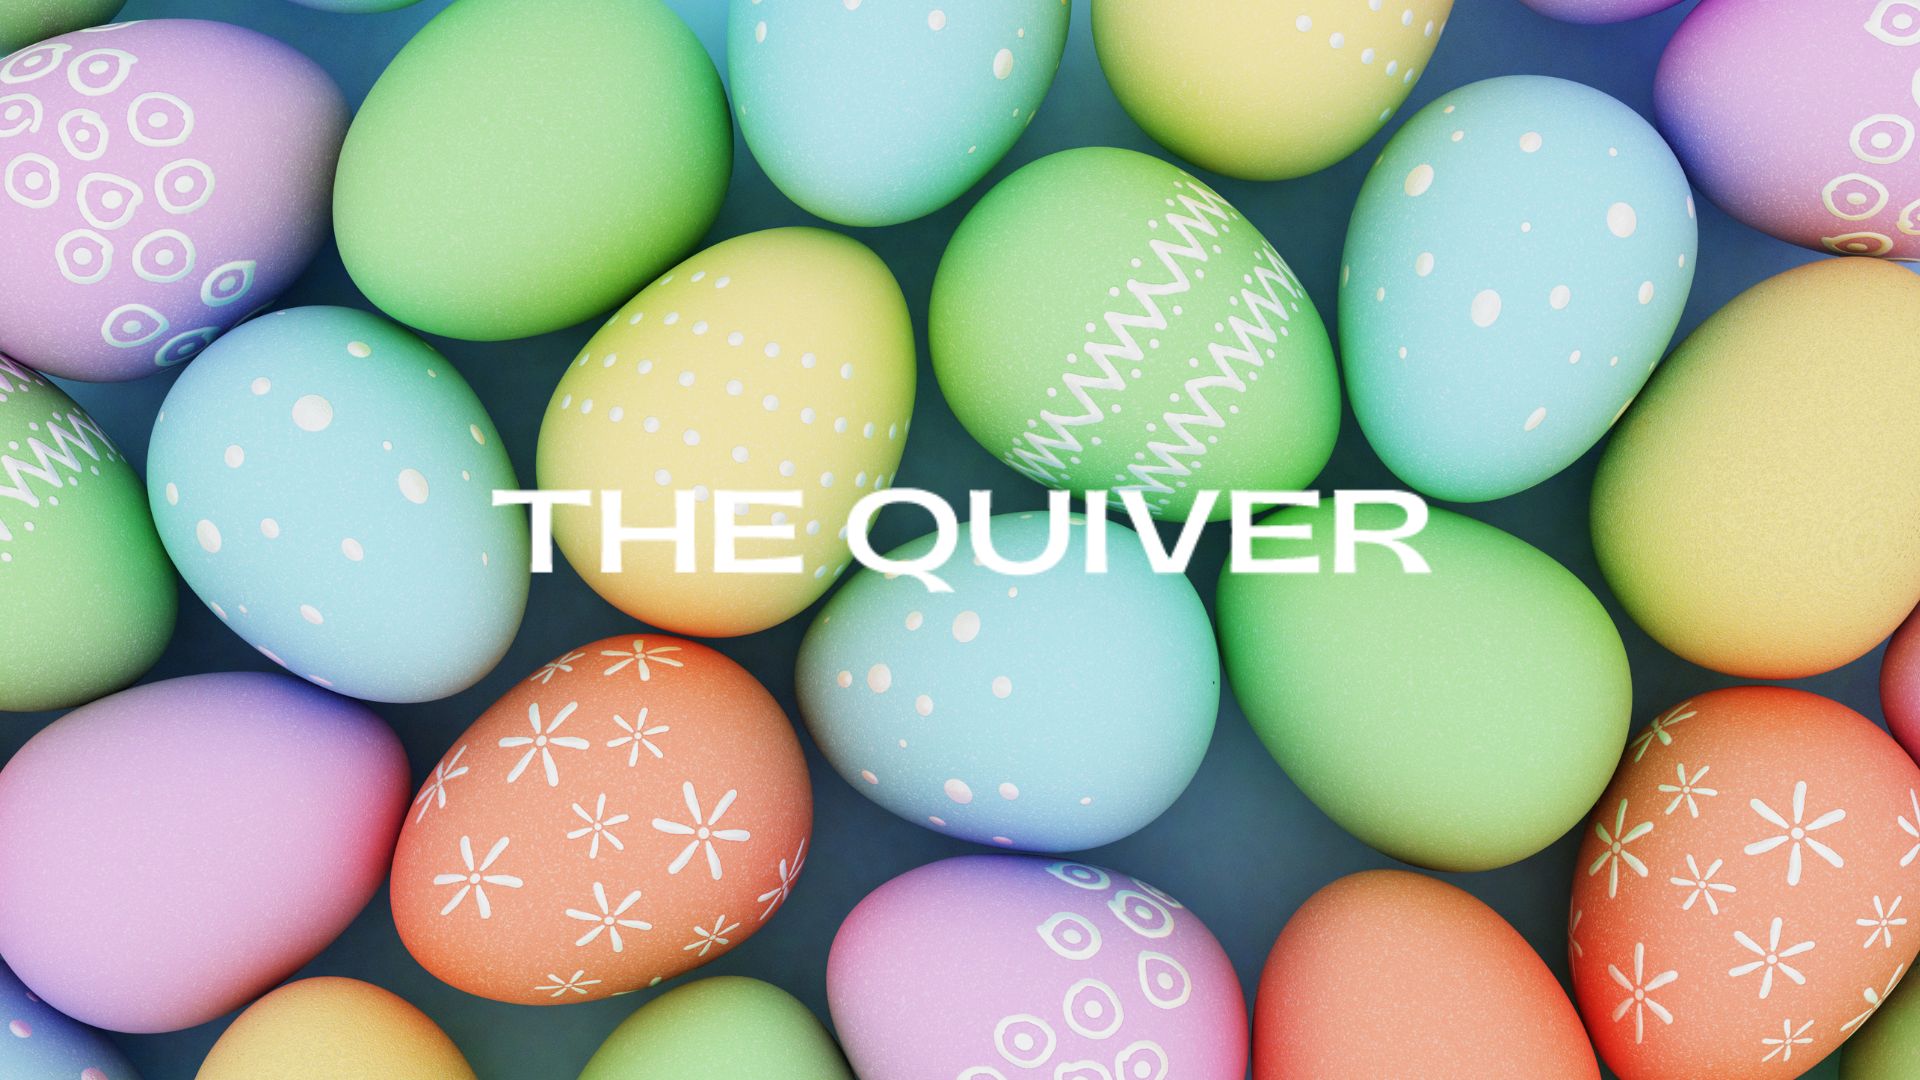 The Quiver logo and text over pastel colored easter eggs